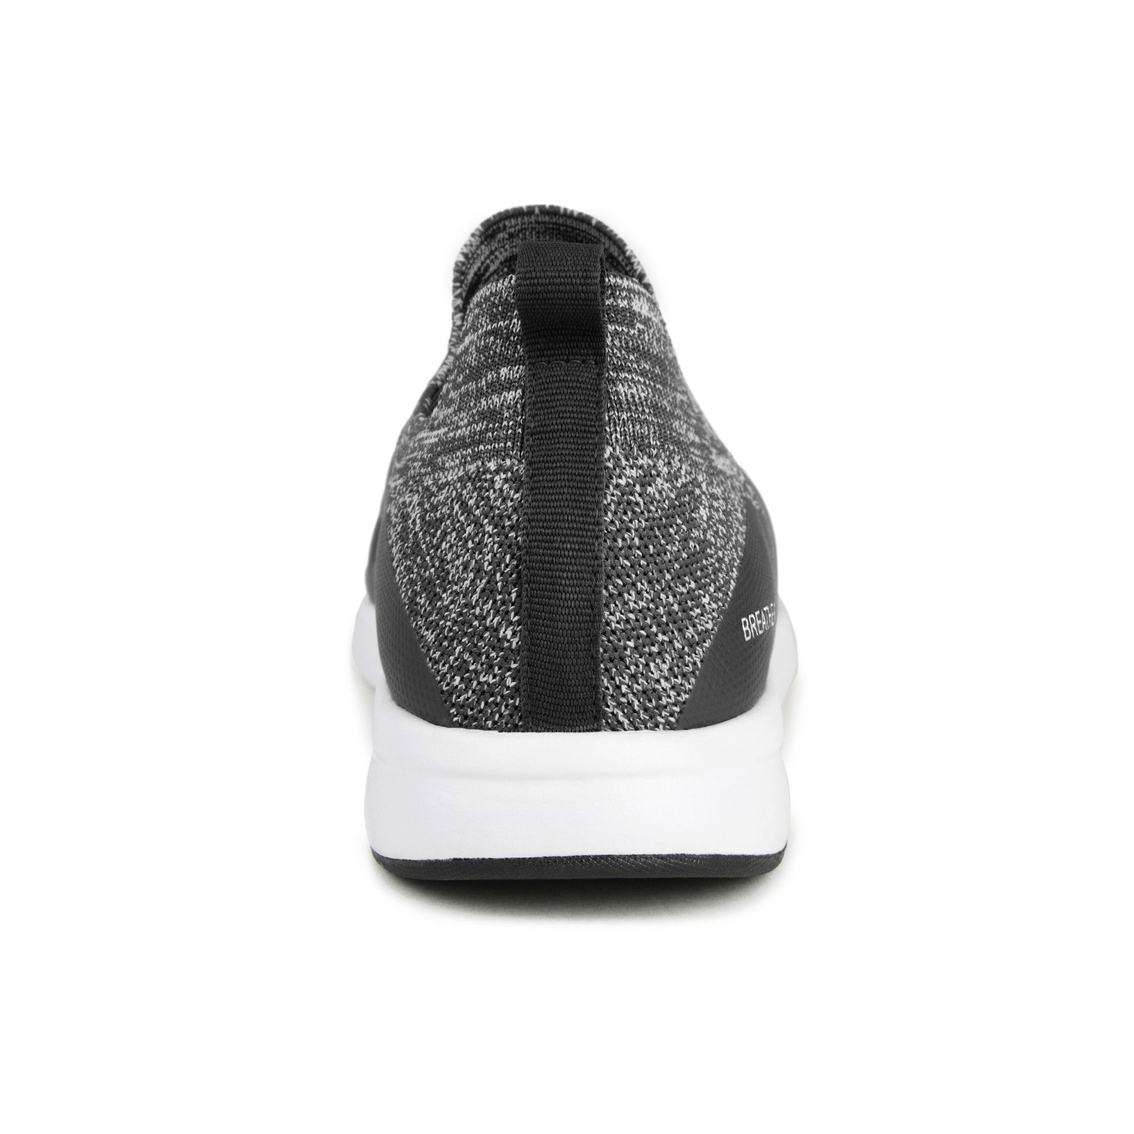 Vance Co. Cannon Casual Slip-on Knit Walking Sneaker - Image 3 of 4